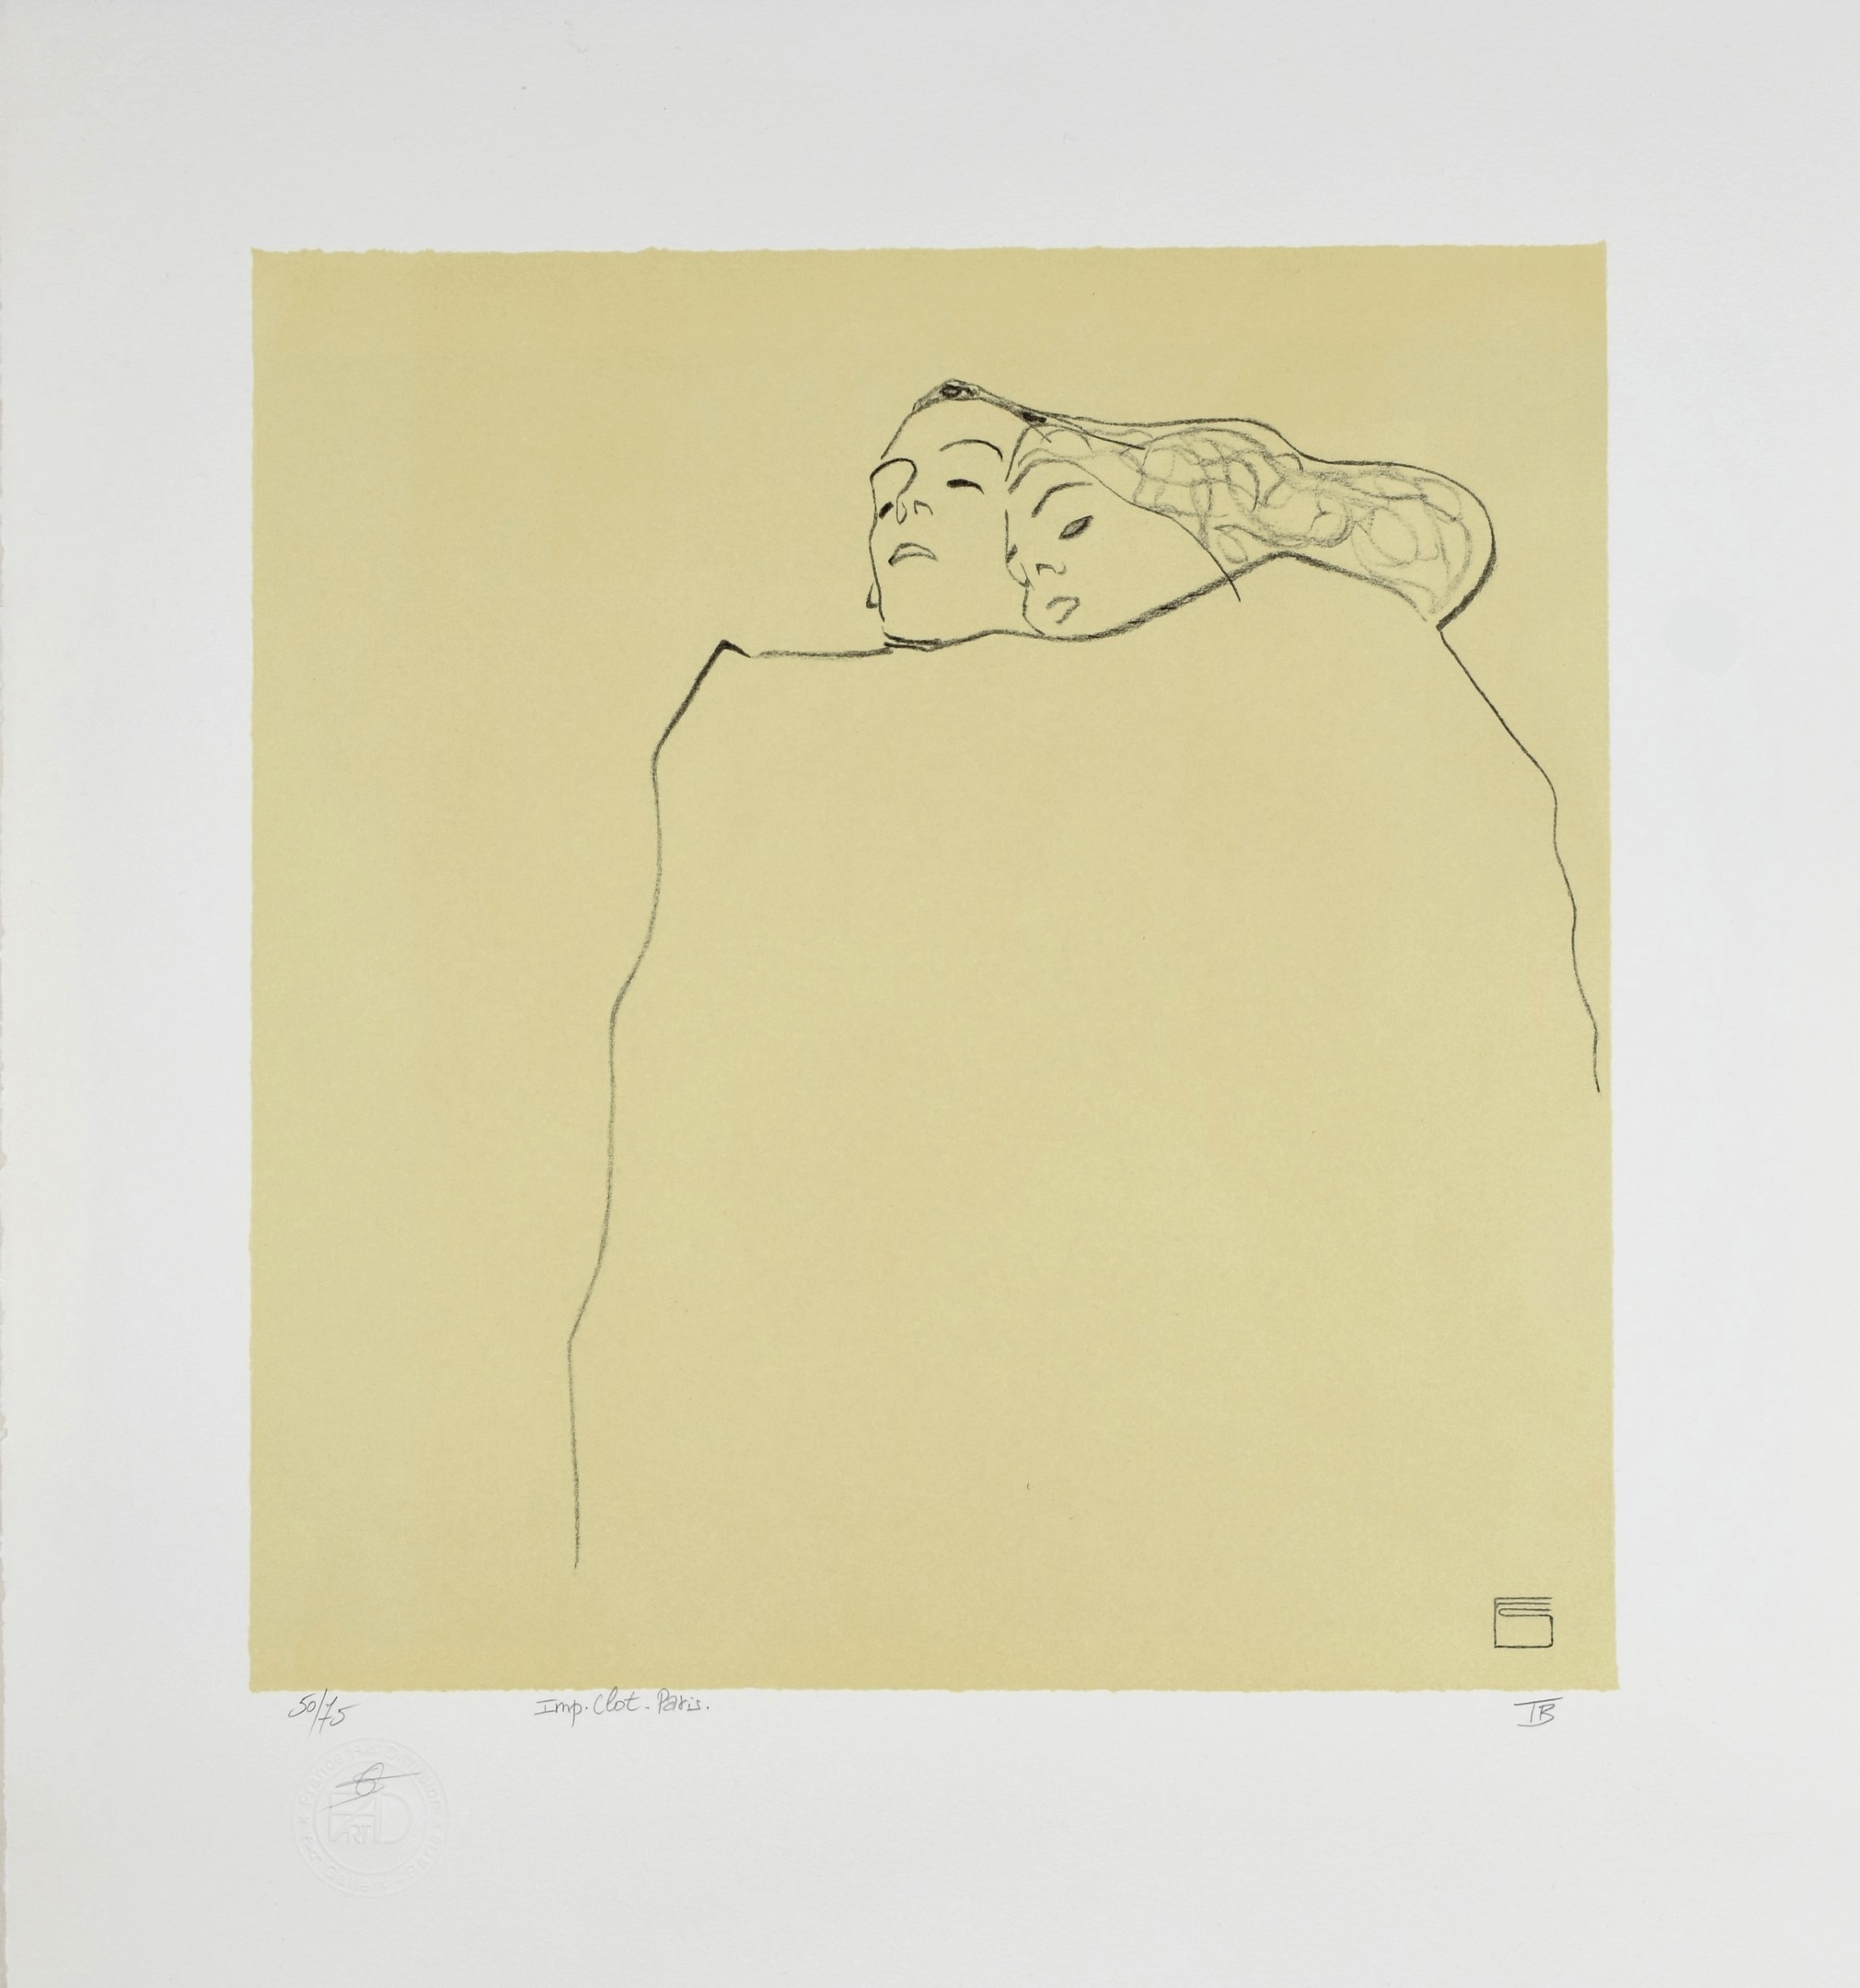 couple sleeping together drawing